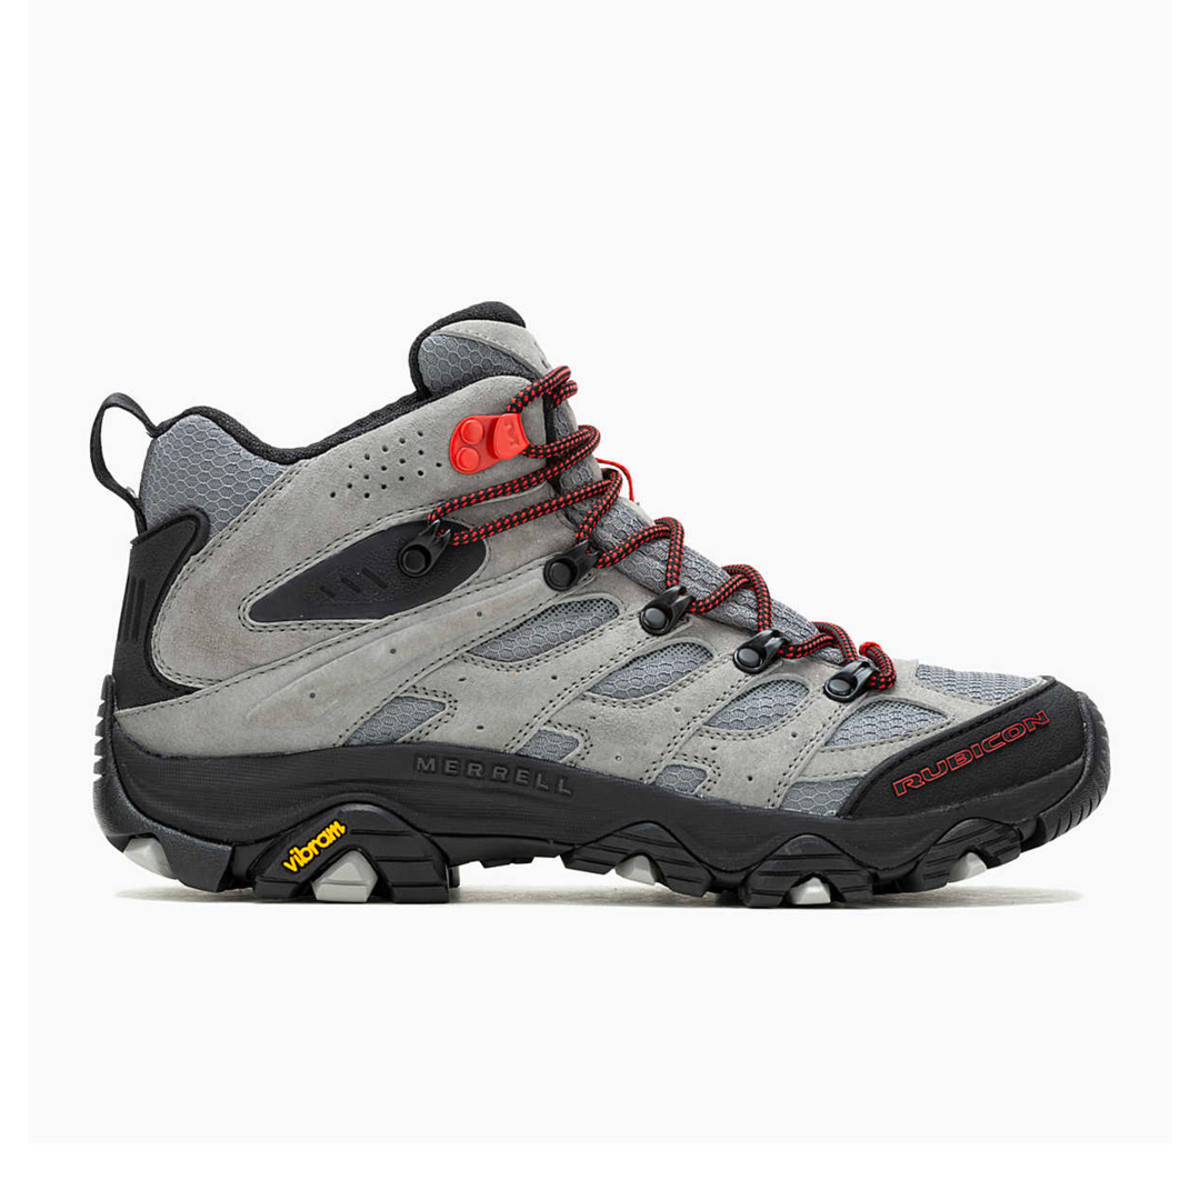 The Merrell Moab 3 Mid X Jeep Boot is on sale right now at Merrell